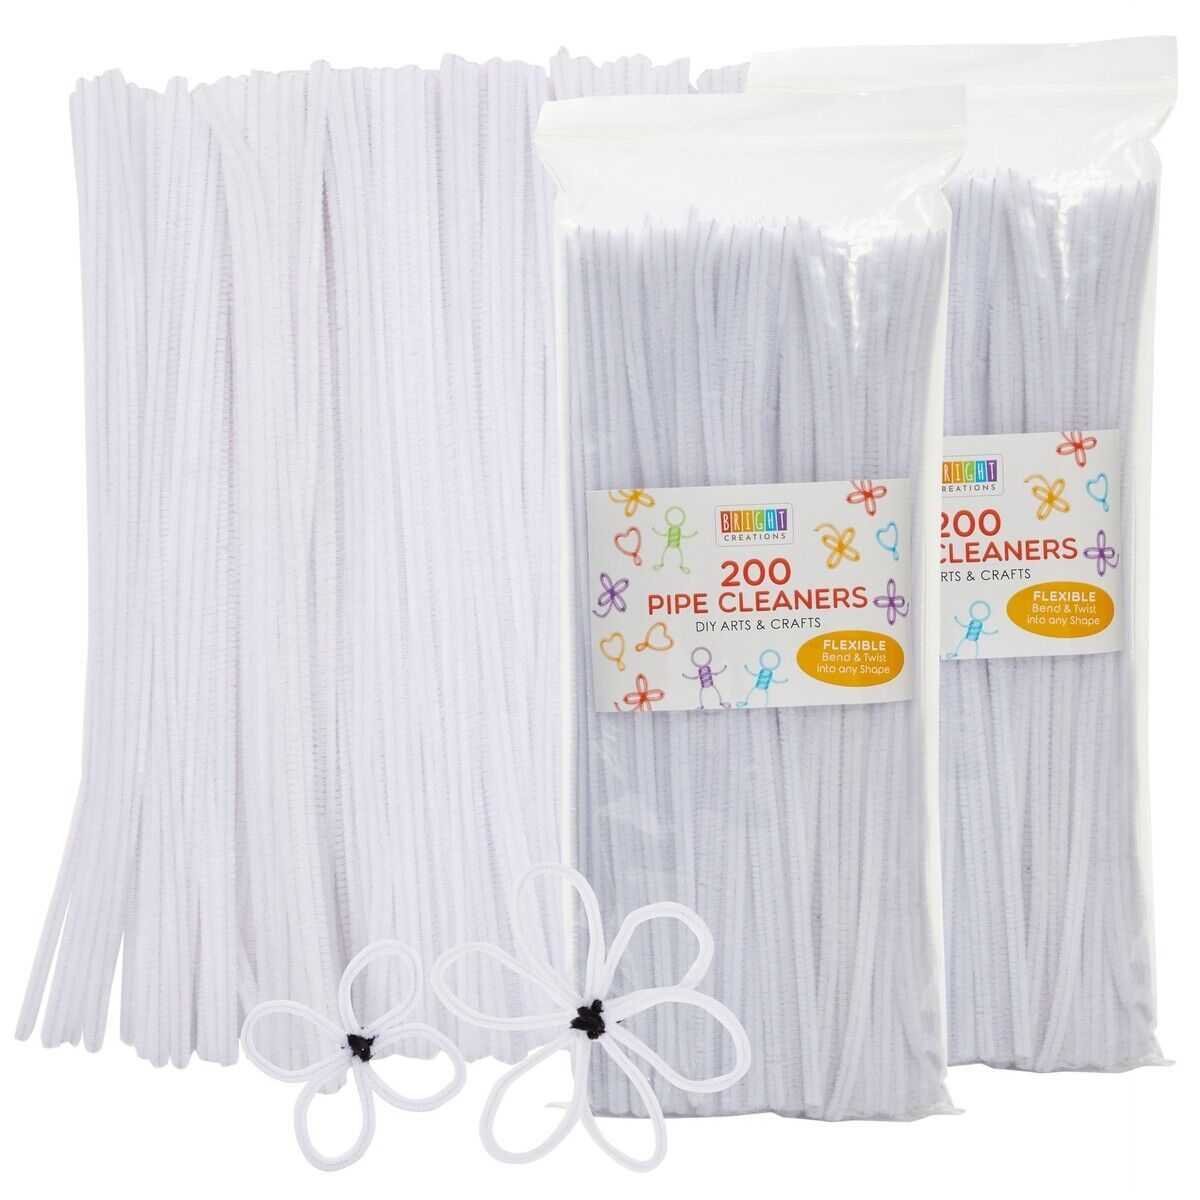 100Pcs Pipe Cleaners 30cm/12 inch Chenille Stems for DIY Art Crafts, White